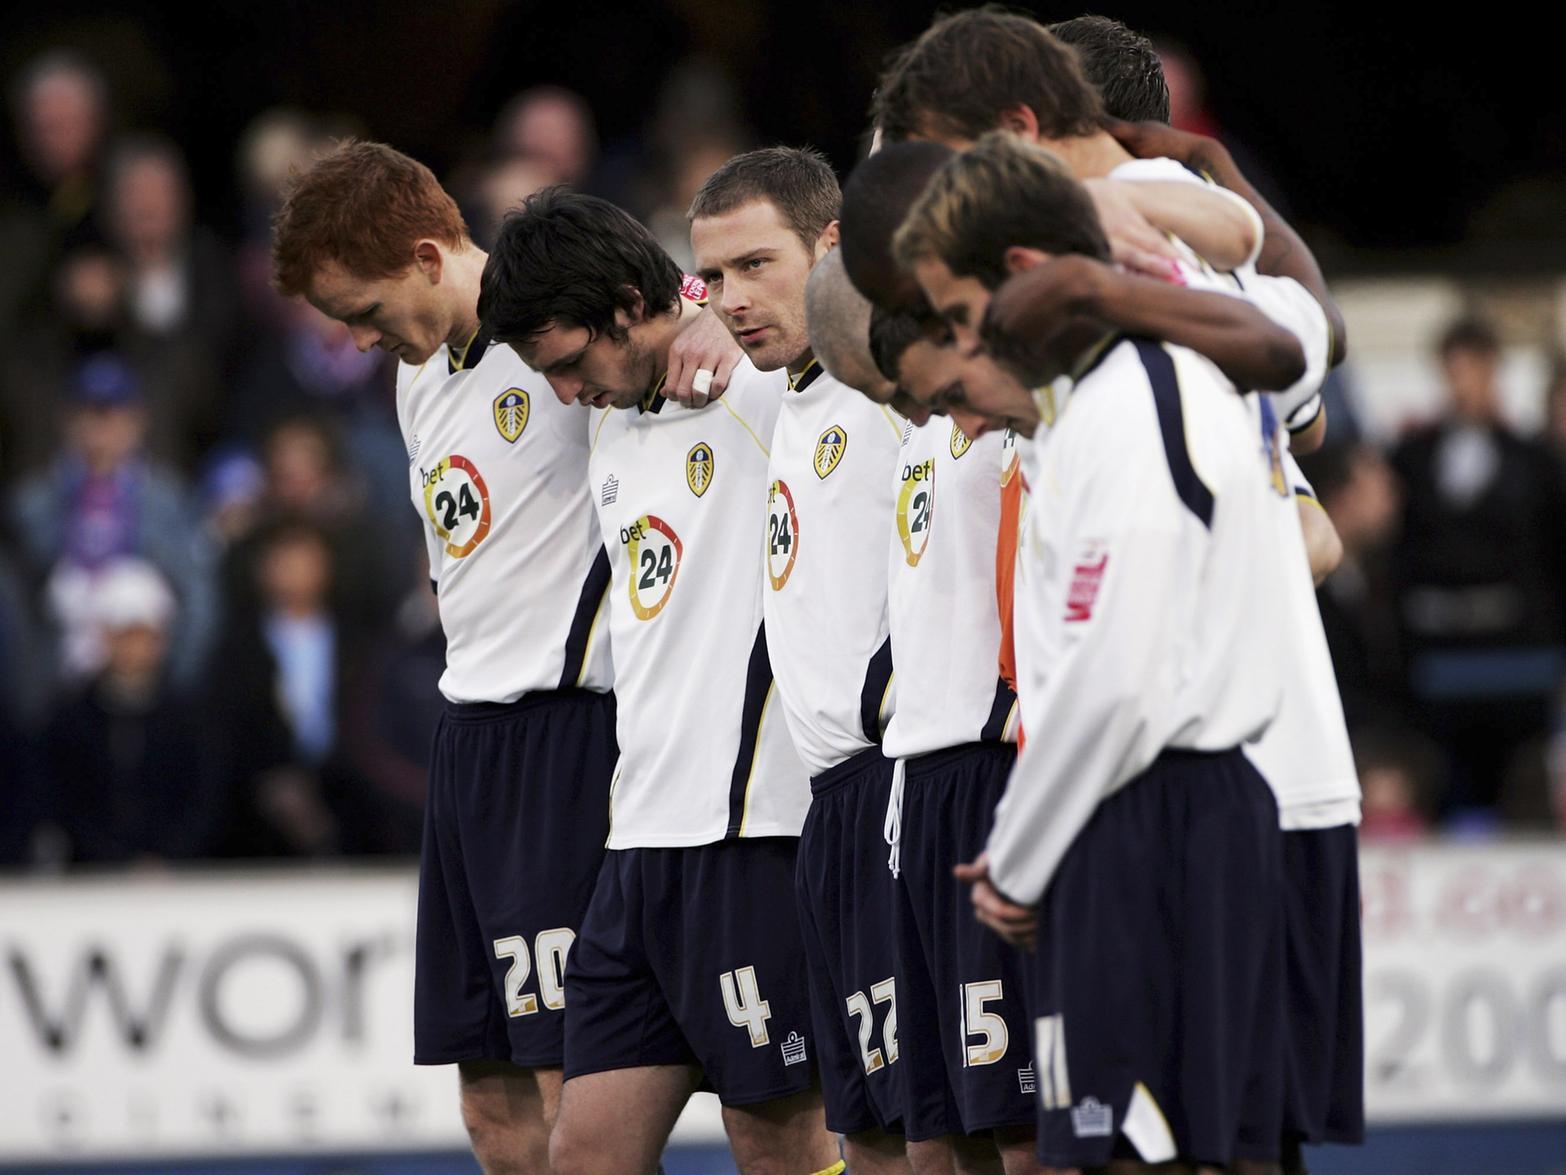 A disastrous season for Leeds saw them relegated from the Championship and exit the FA Cup in the third round.